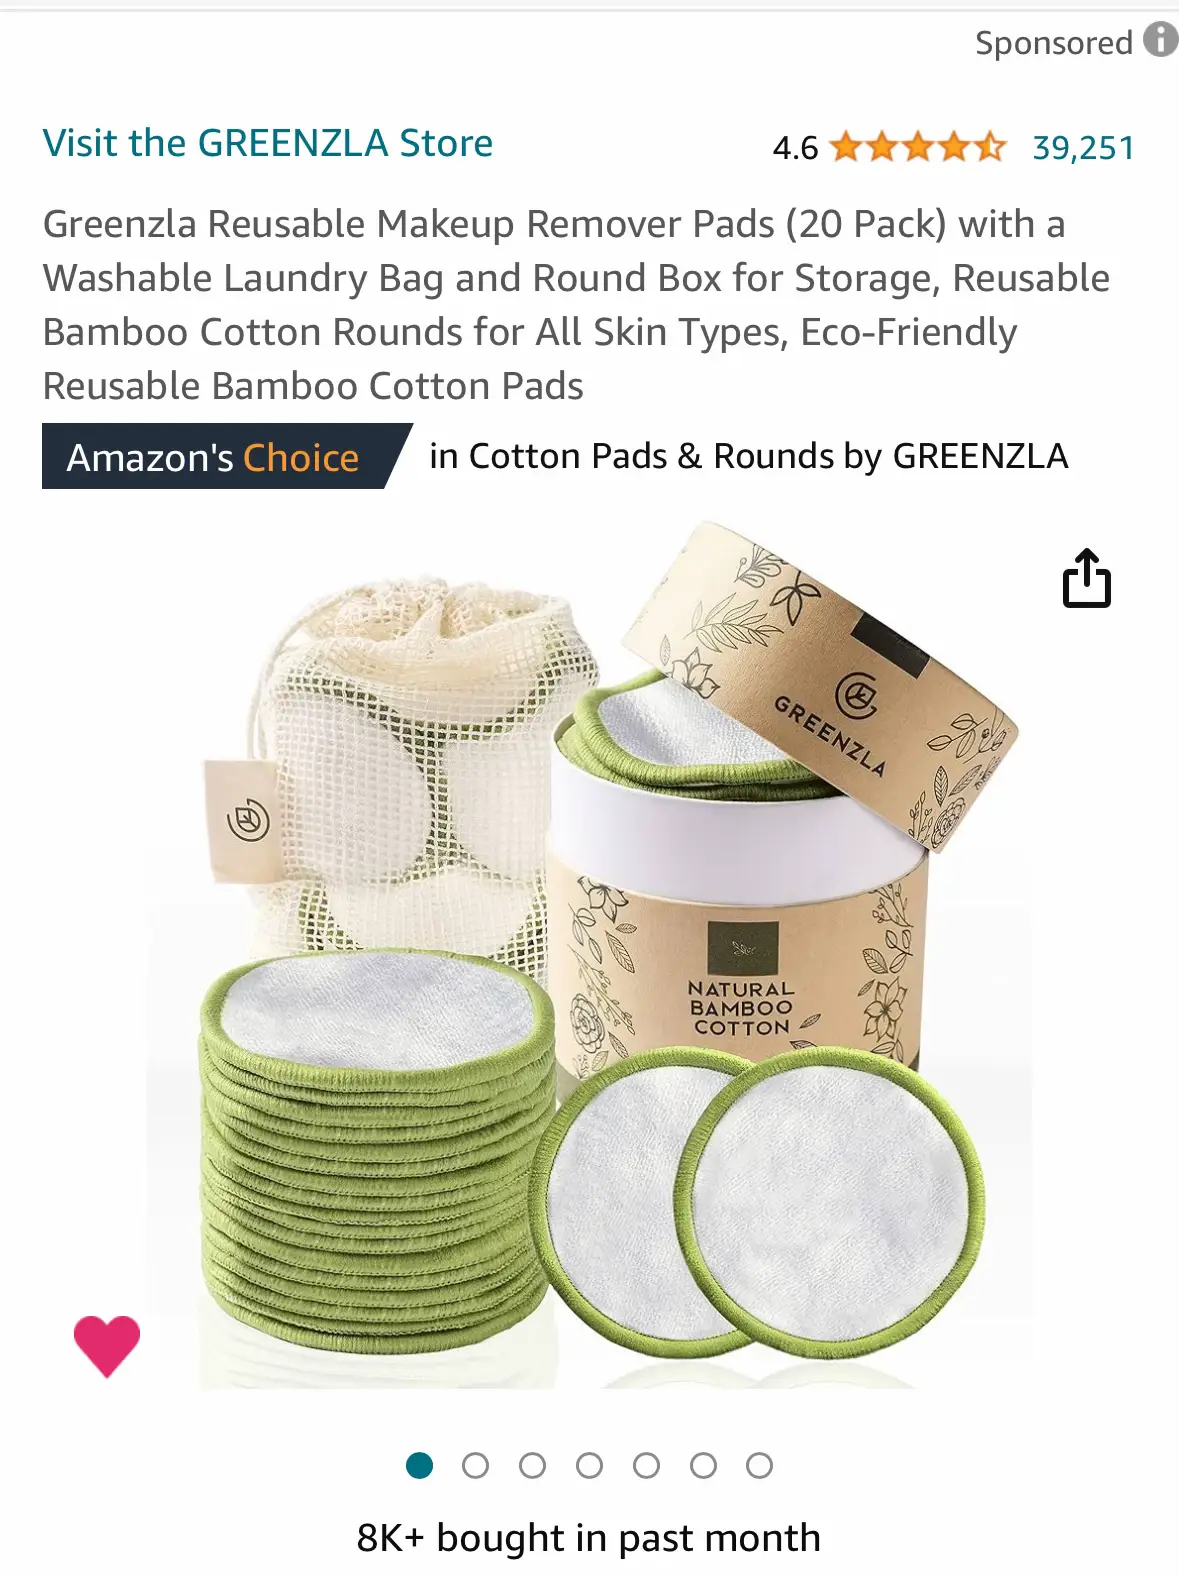 Greenzla Reusable Makeup Remover Pads (20 Pack) with a Washable Laundry Bag  and Round Box for Storage, Reusable Bamboo Cotton Rounds for All Skin